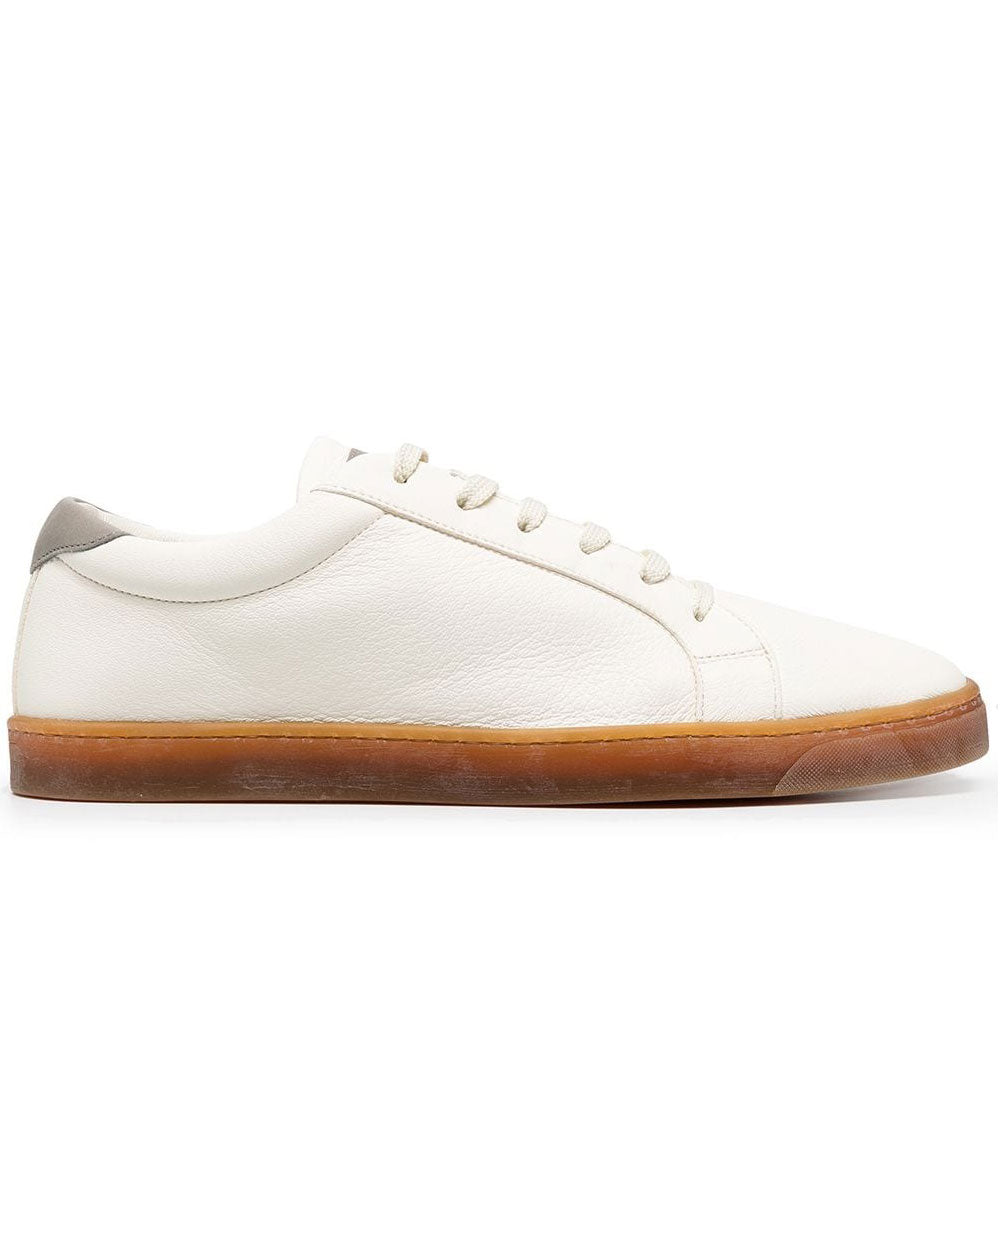 White Leather Low Top Deconstructed Sneaker